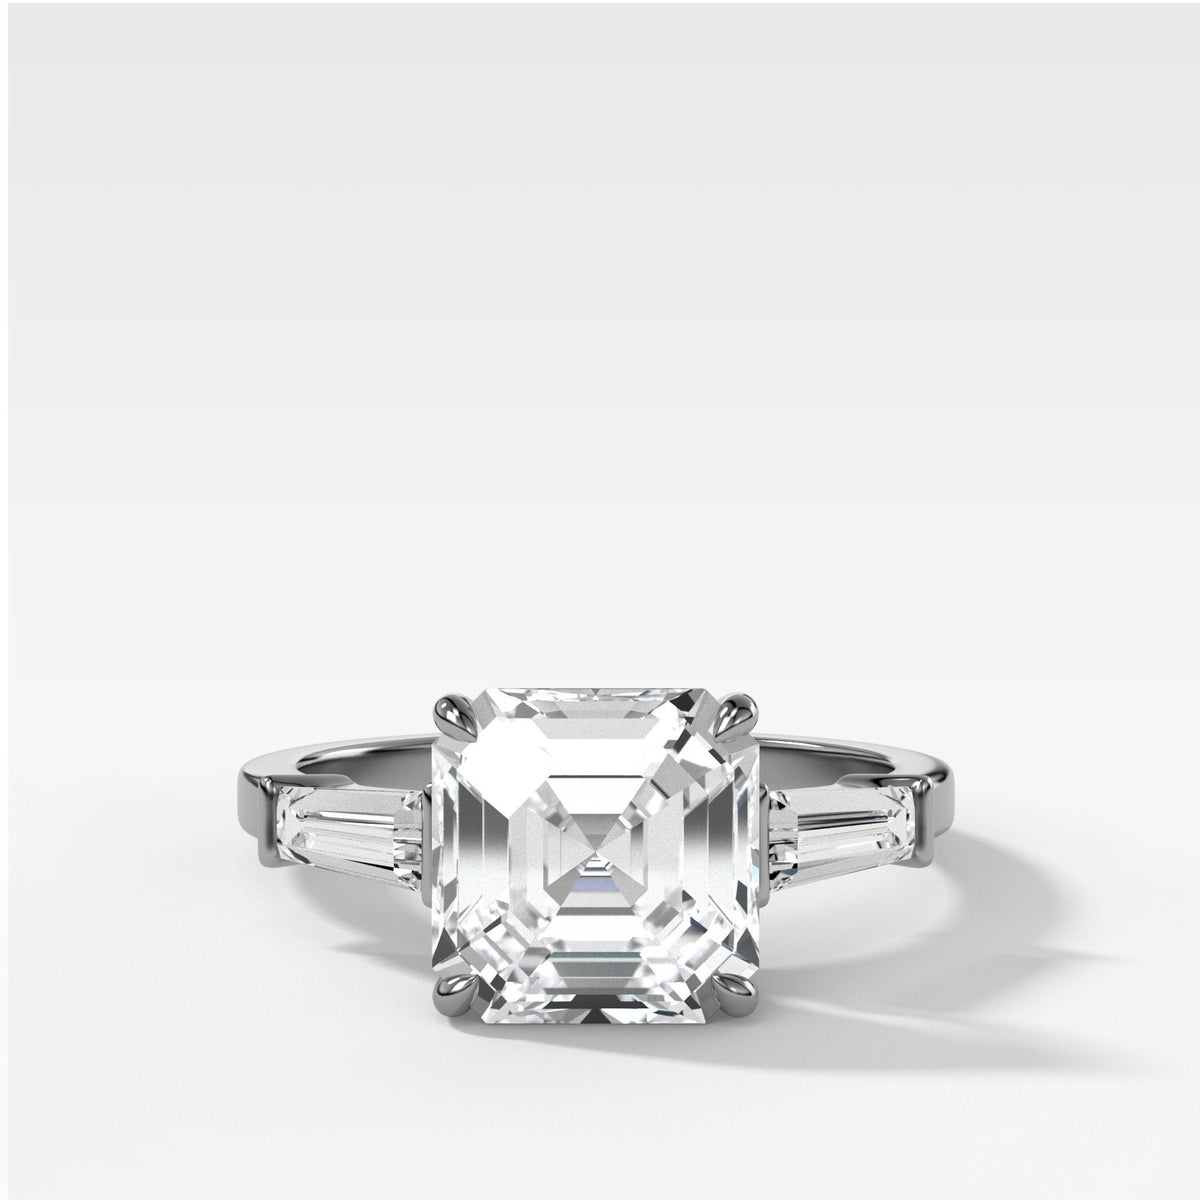 Translunar Tapered Baguette Engagement Ring With Asscher Cut by Good Stone in White Gold